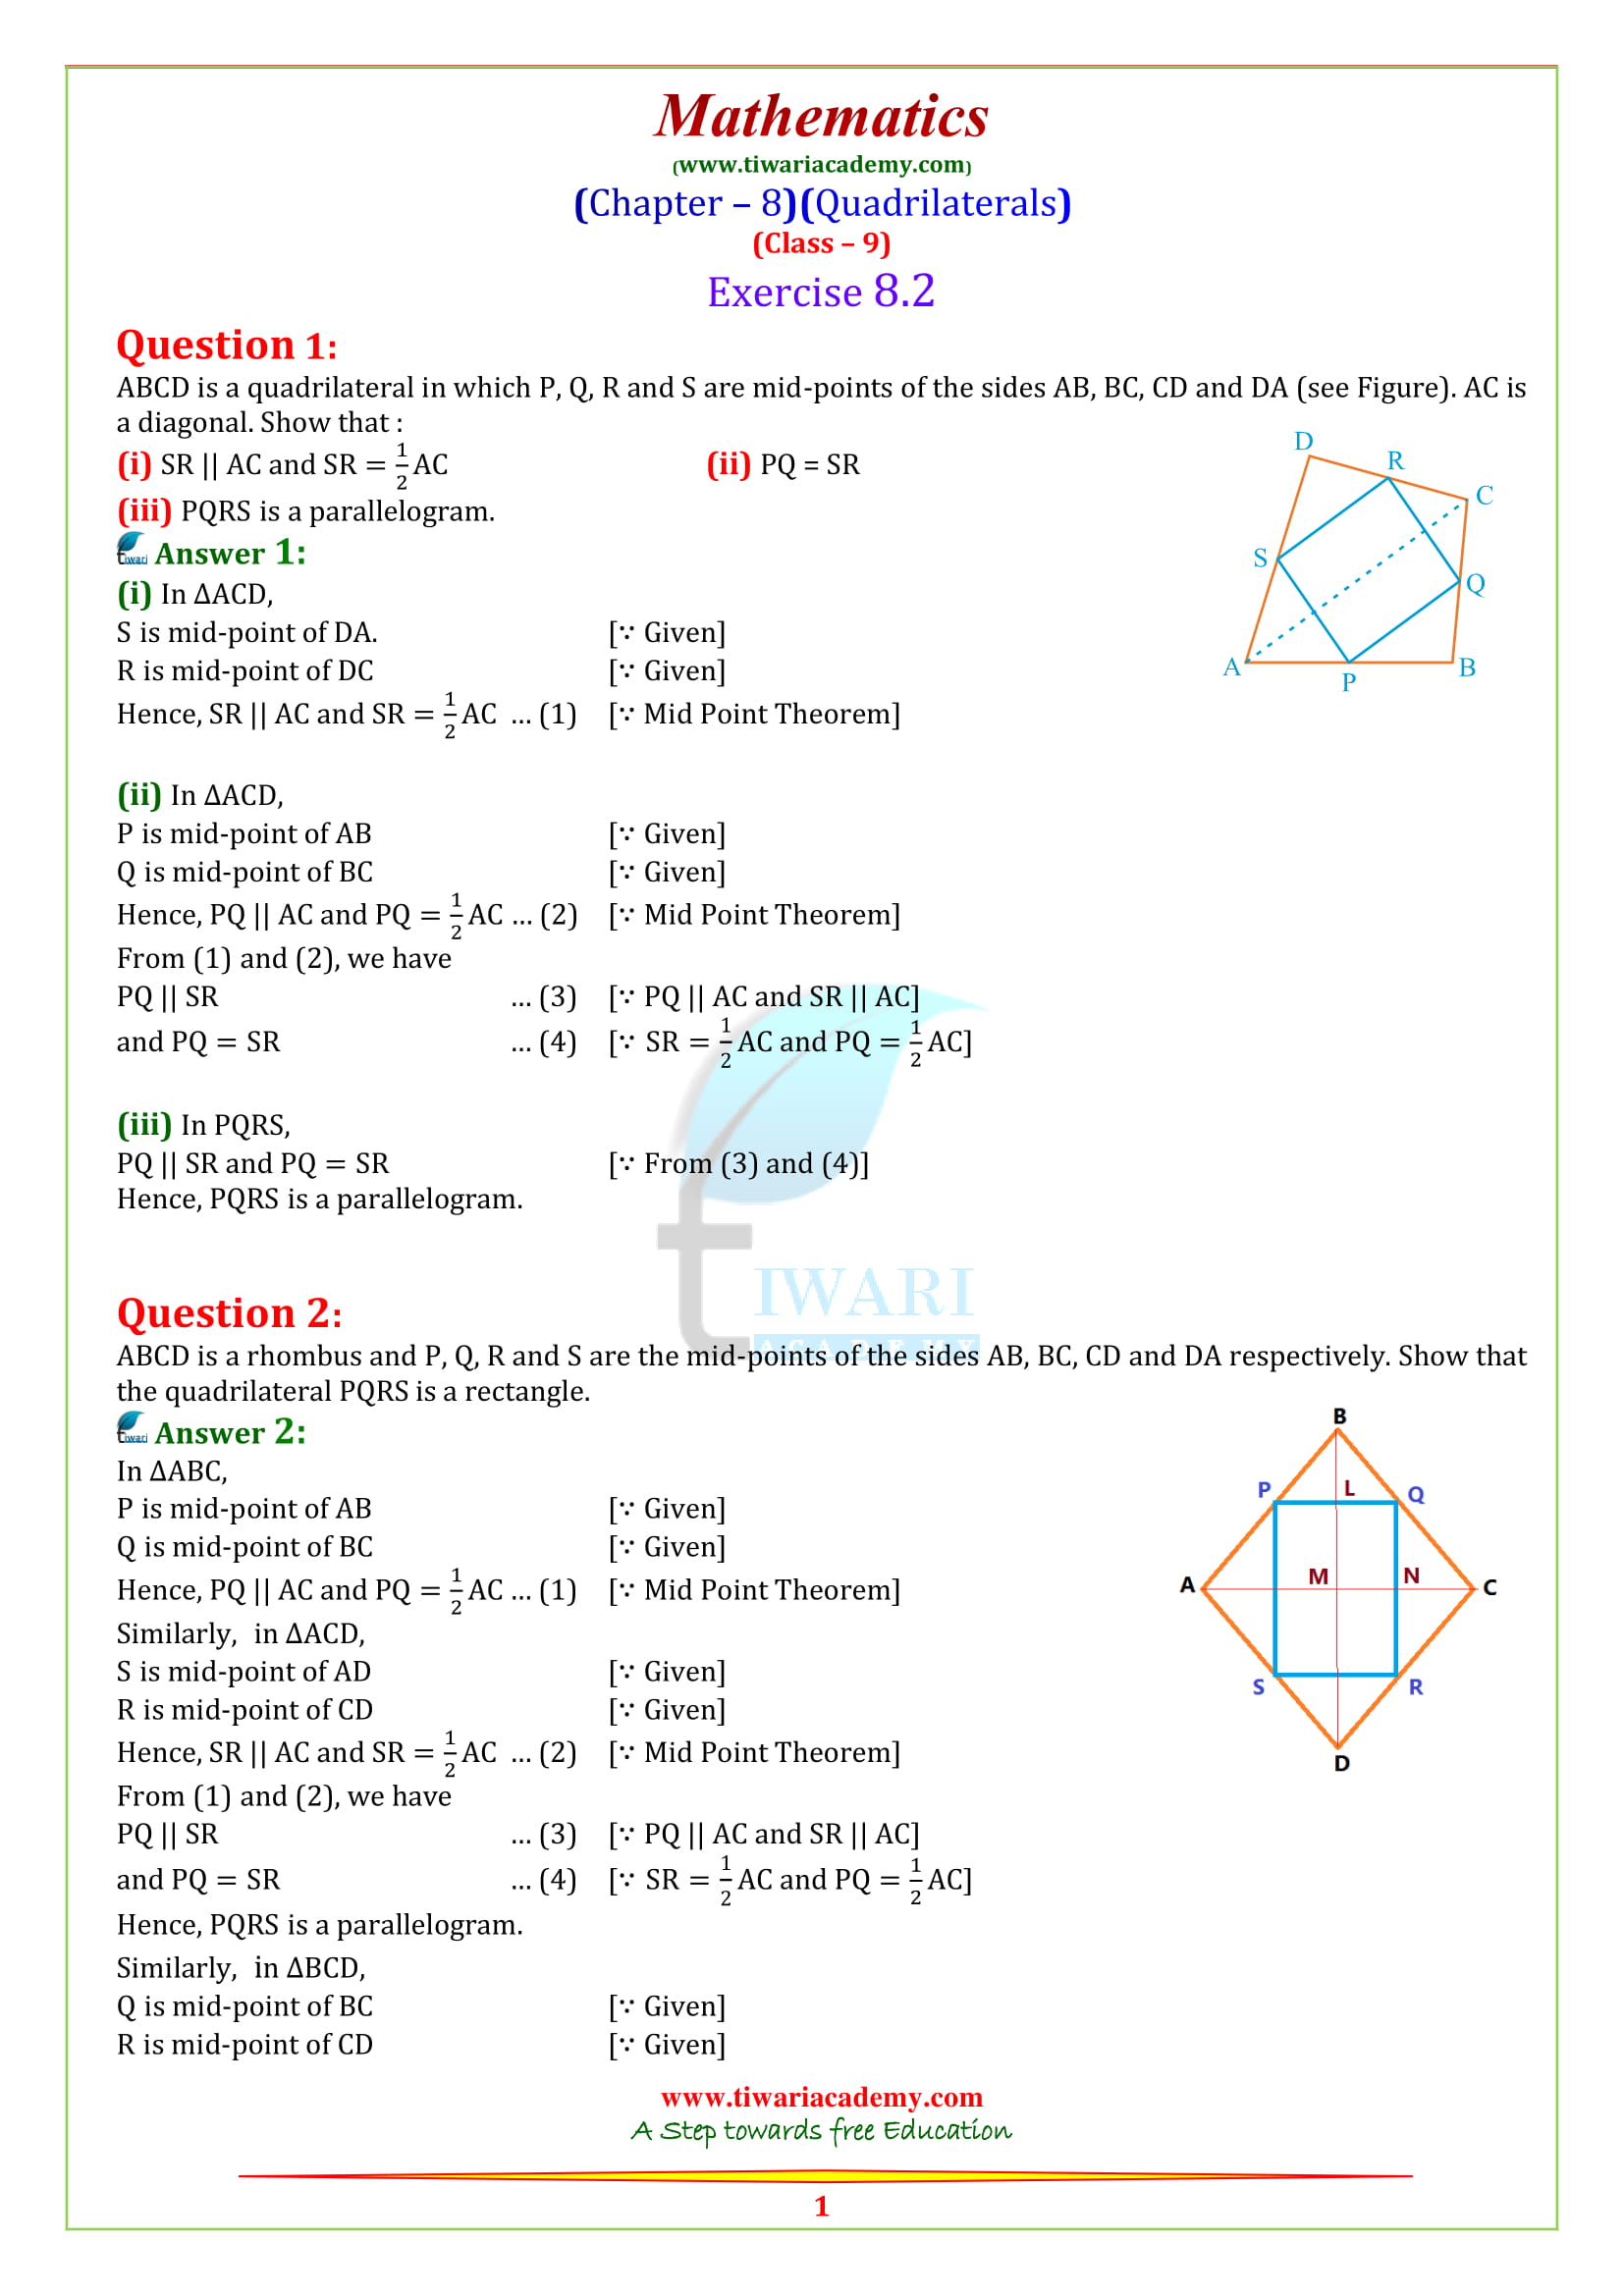 9 Maths solutions exercise 8.2 quadrilaterals